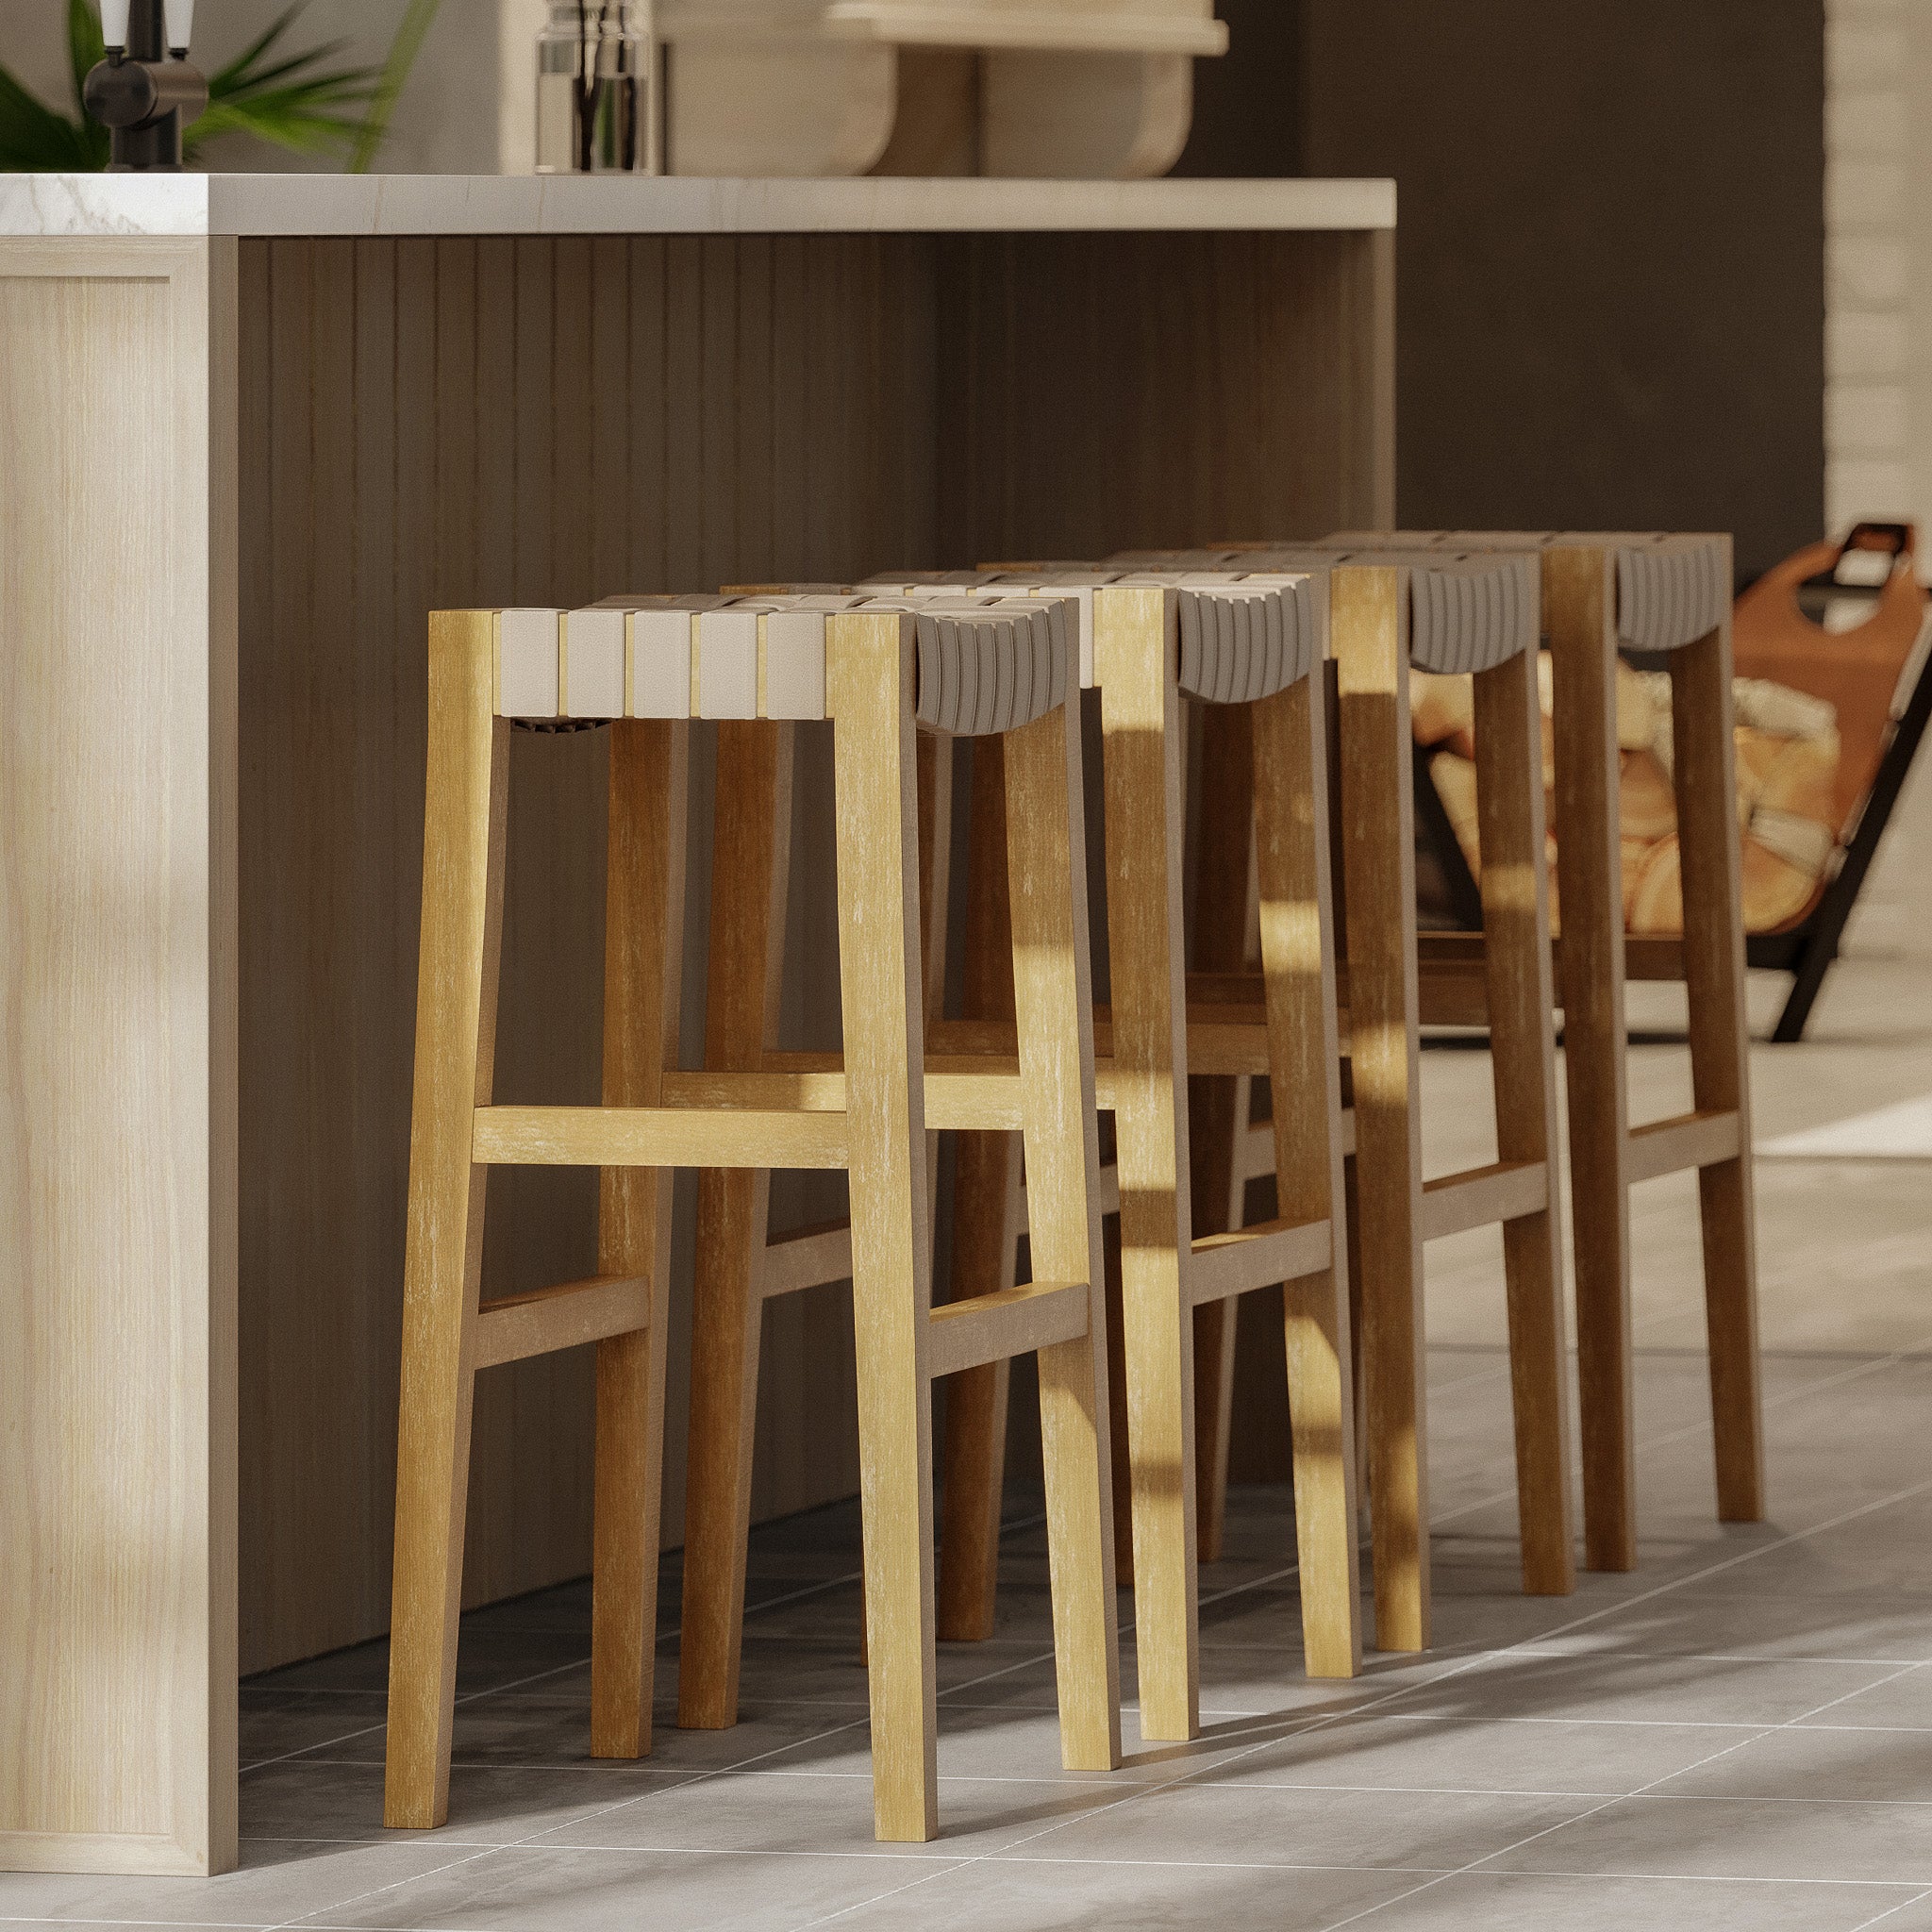 Emerson Bar Stool in Weathered Natural Wood Finish with Avanti Bone Vegan Leather in Stools by Maven Lane